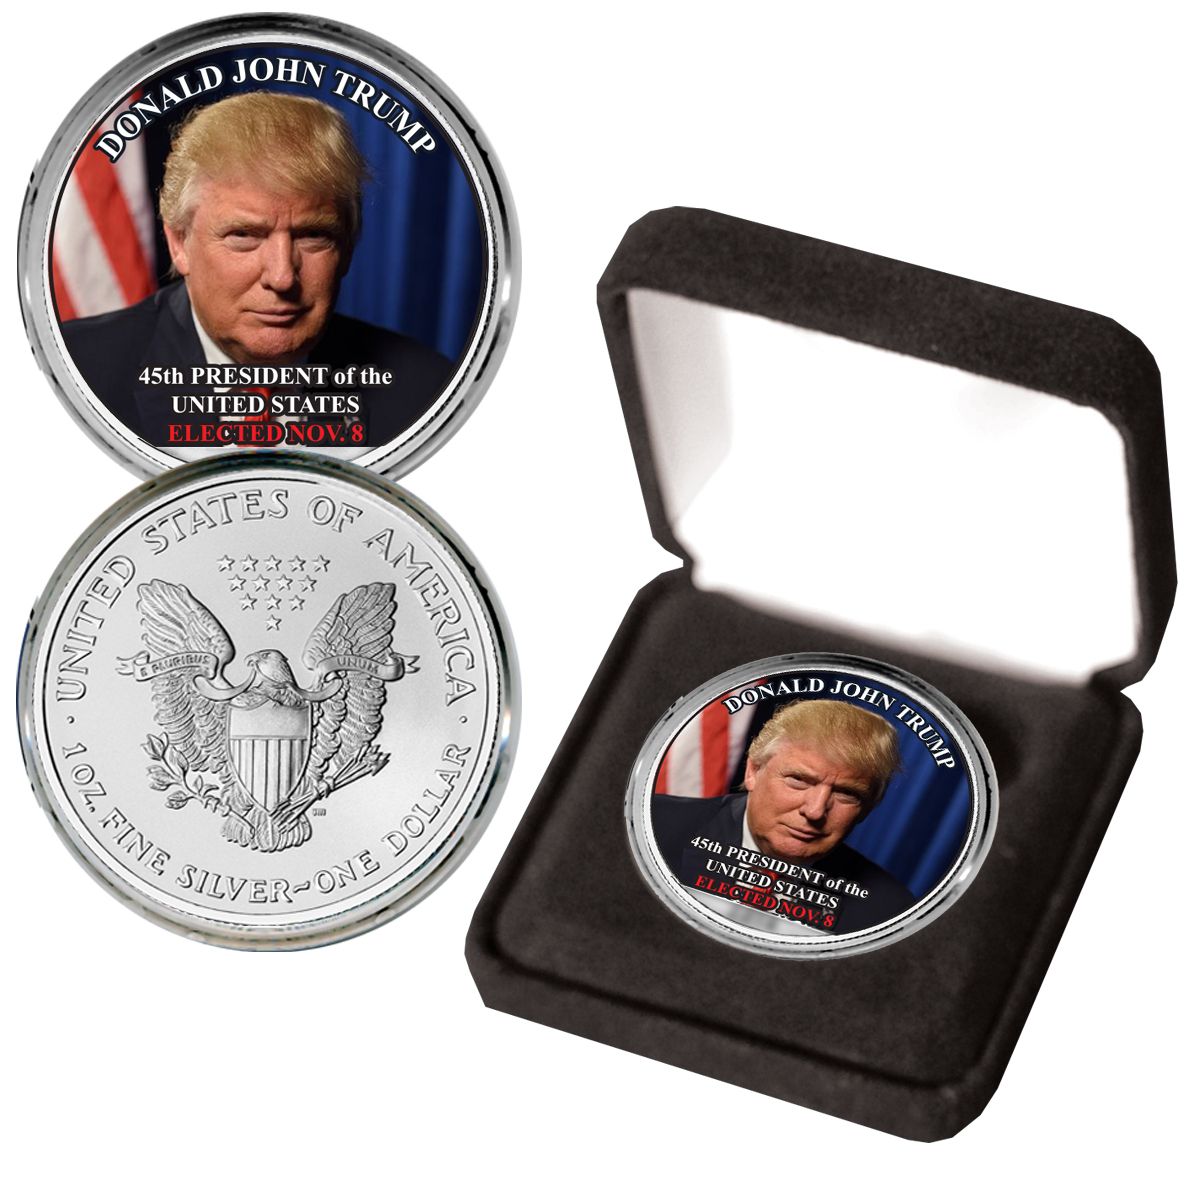 Donald Trump 45th President COLORIZED Liberty Proof 1 OZ Golden Tribute Coin 